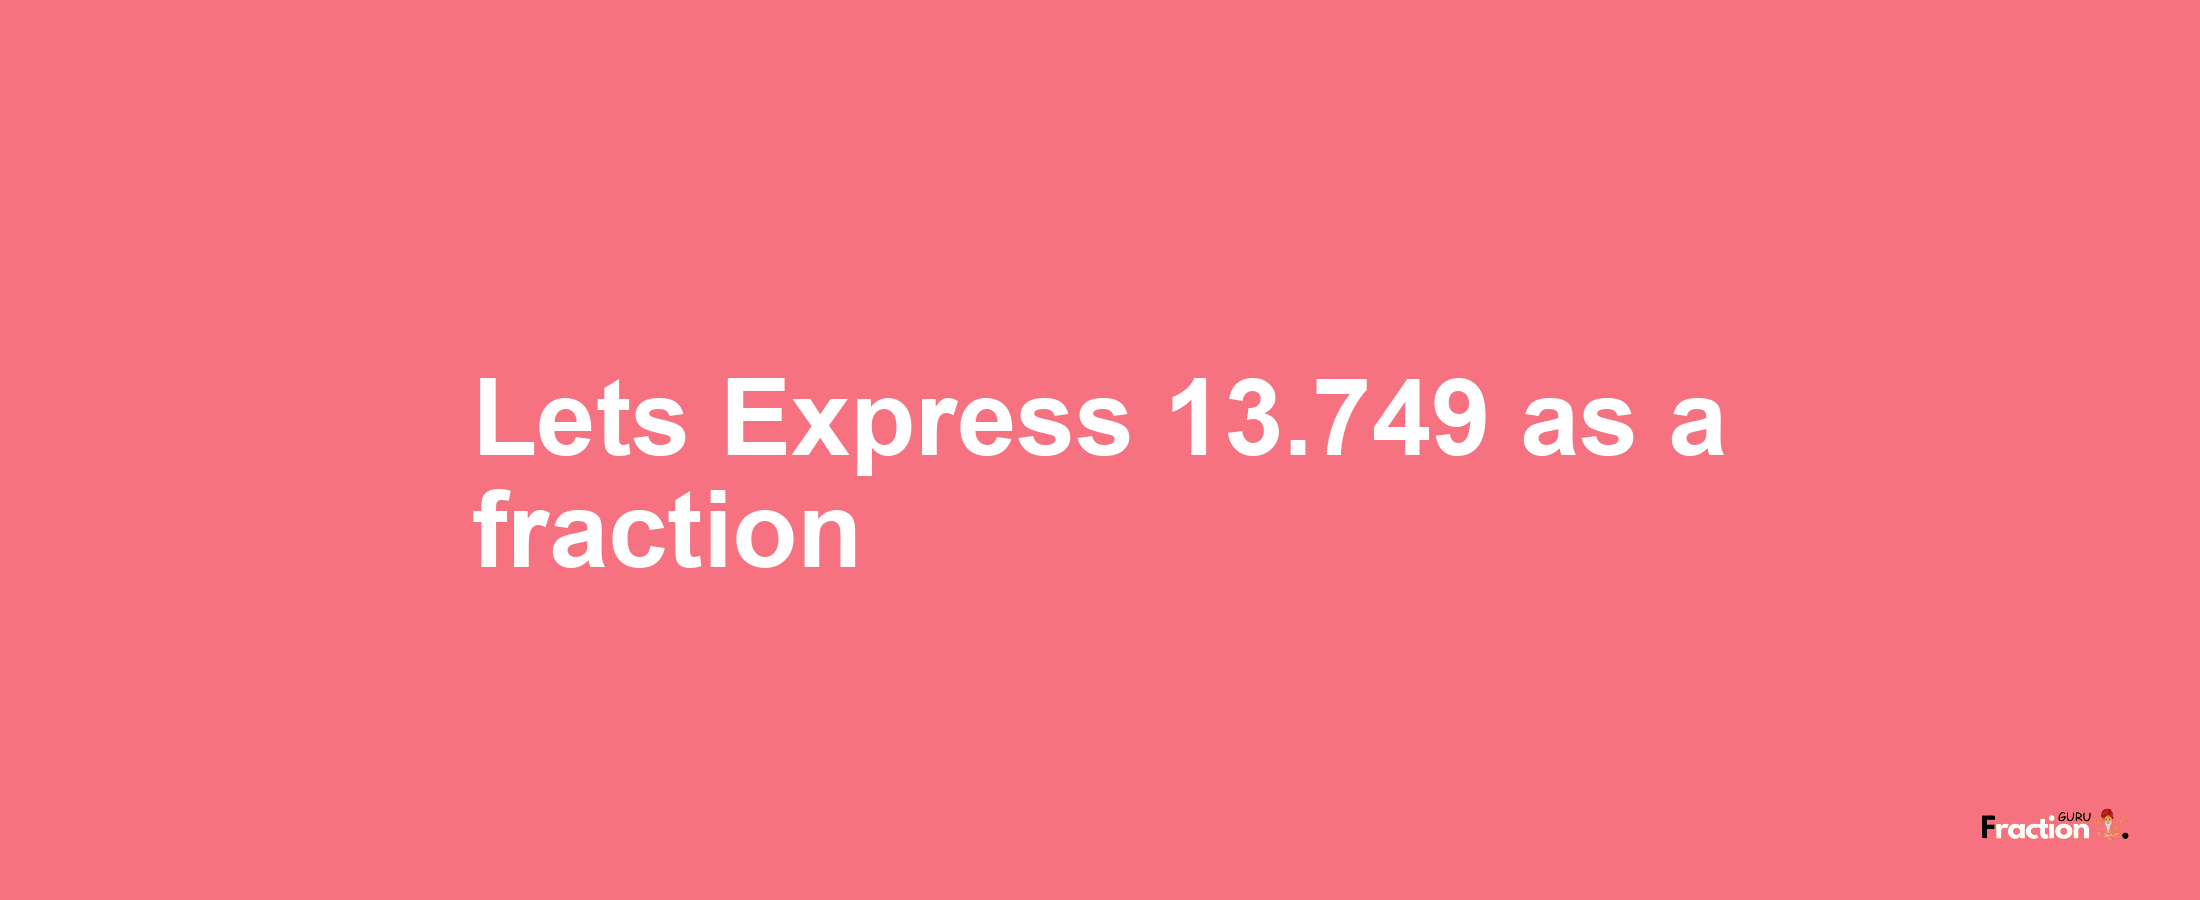 Lets Express 13.749 as afraction